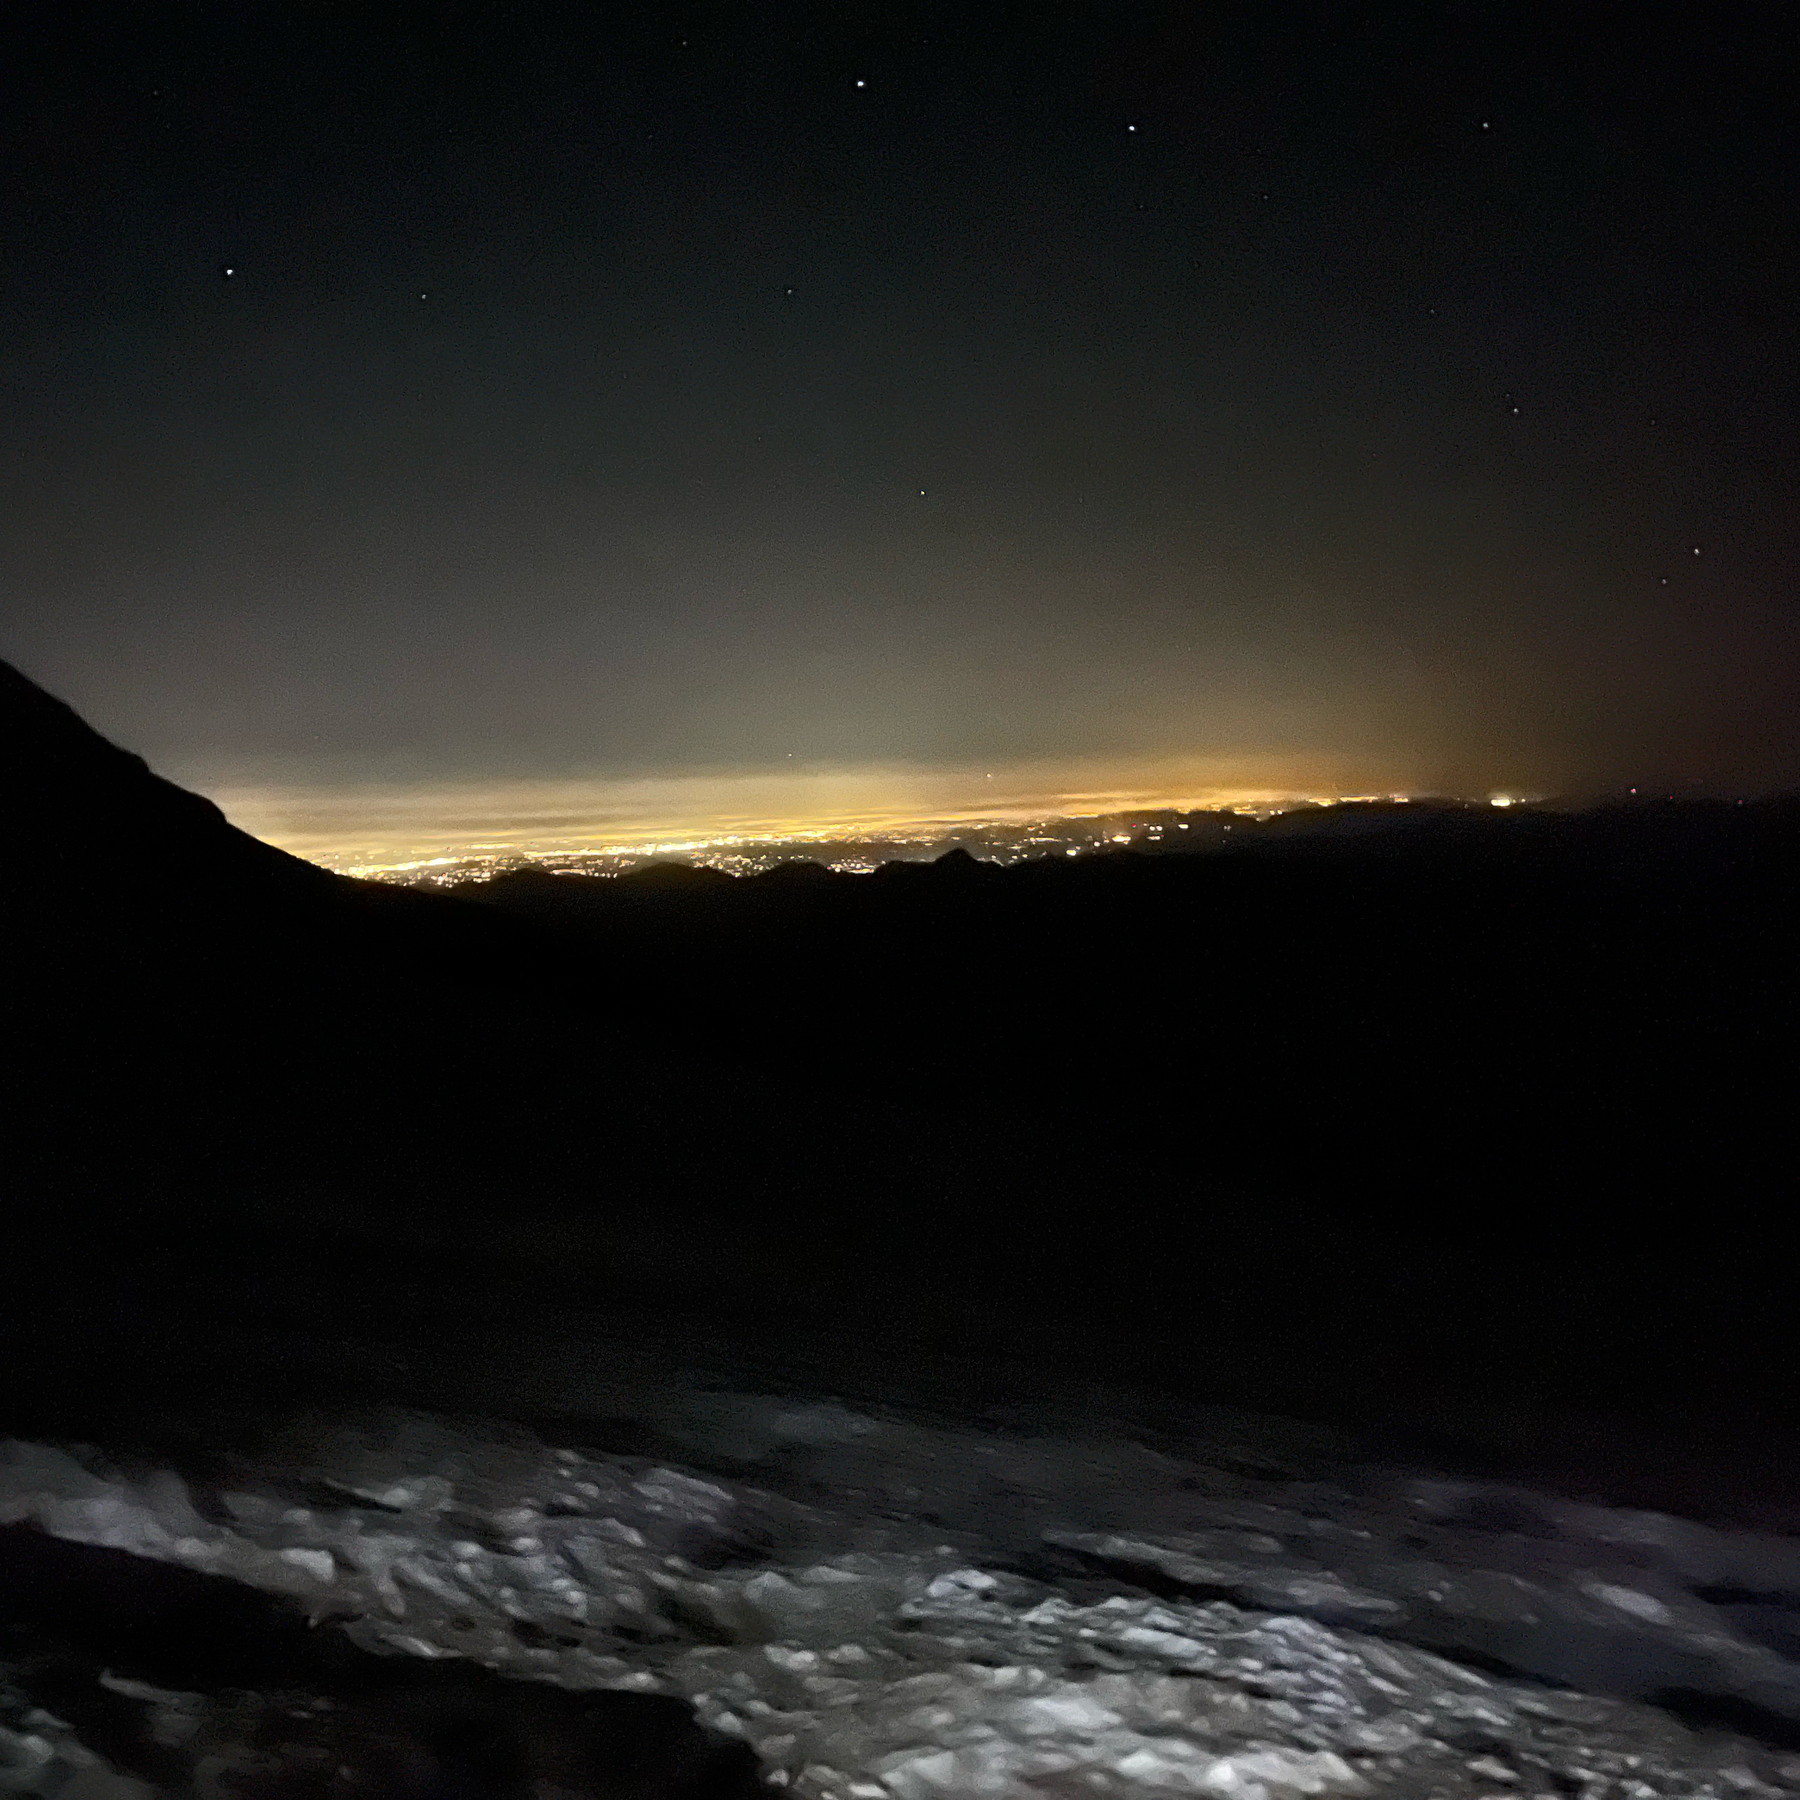 A lightened city as seen in the distance from a mountainside in pitch dark.